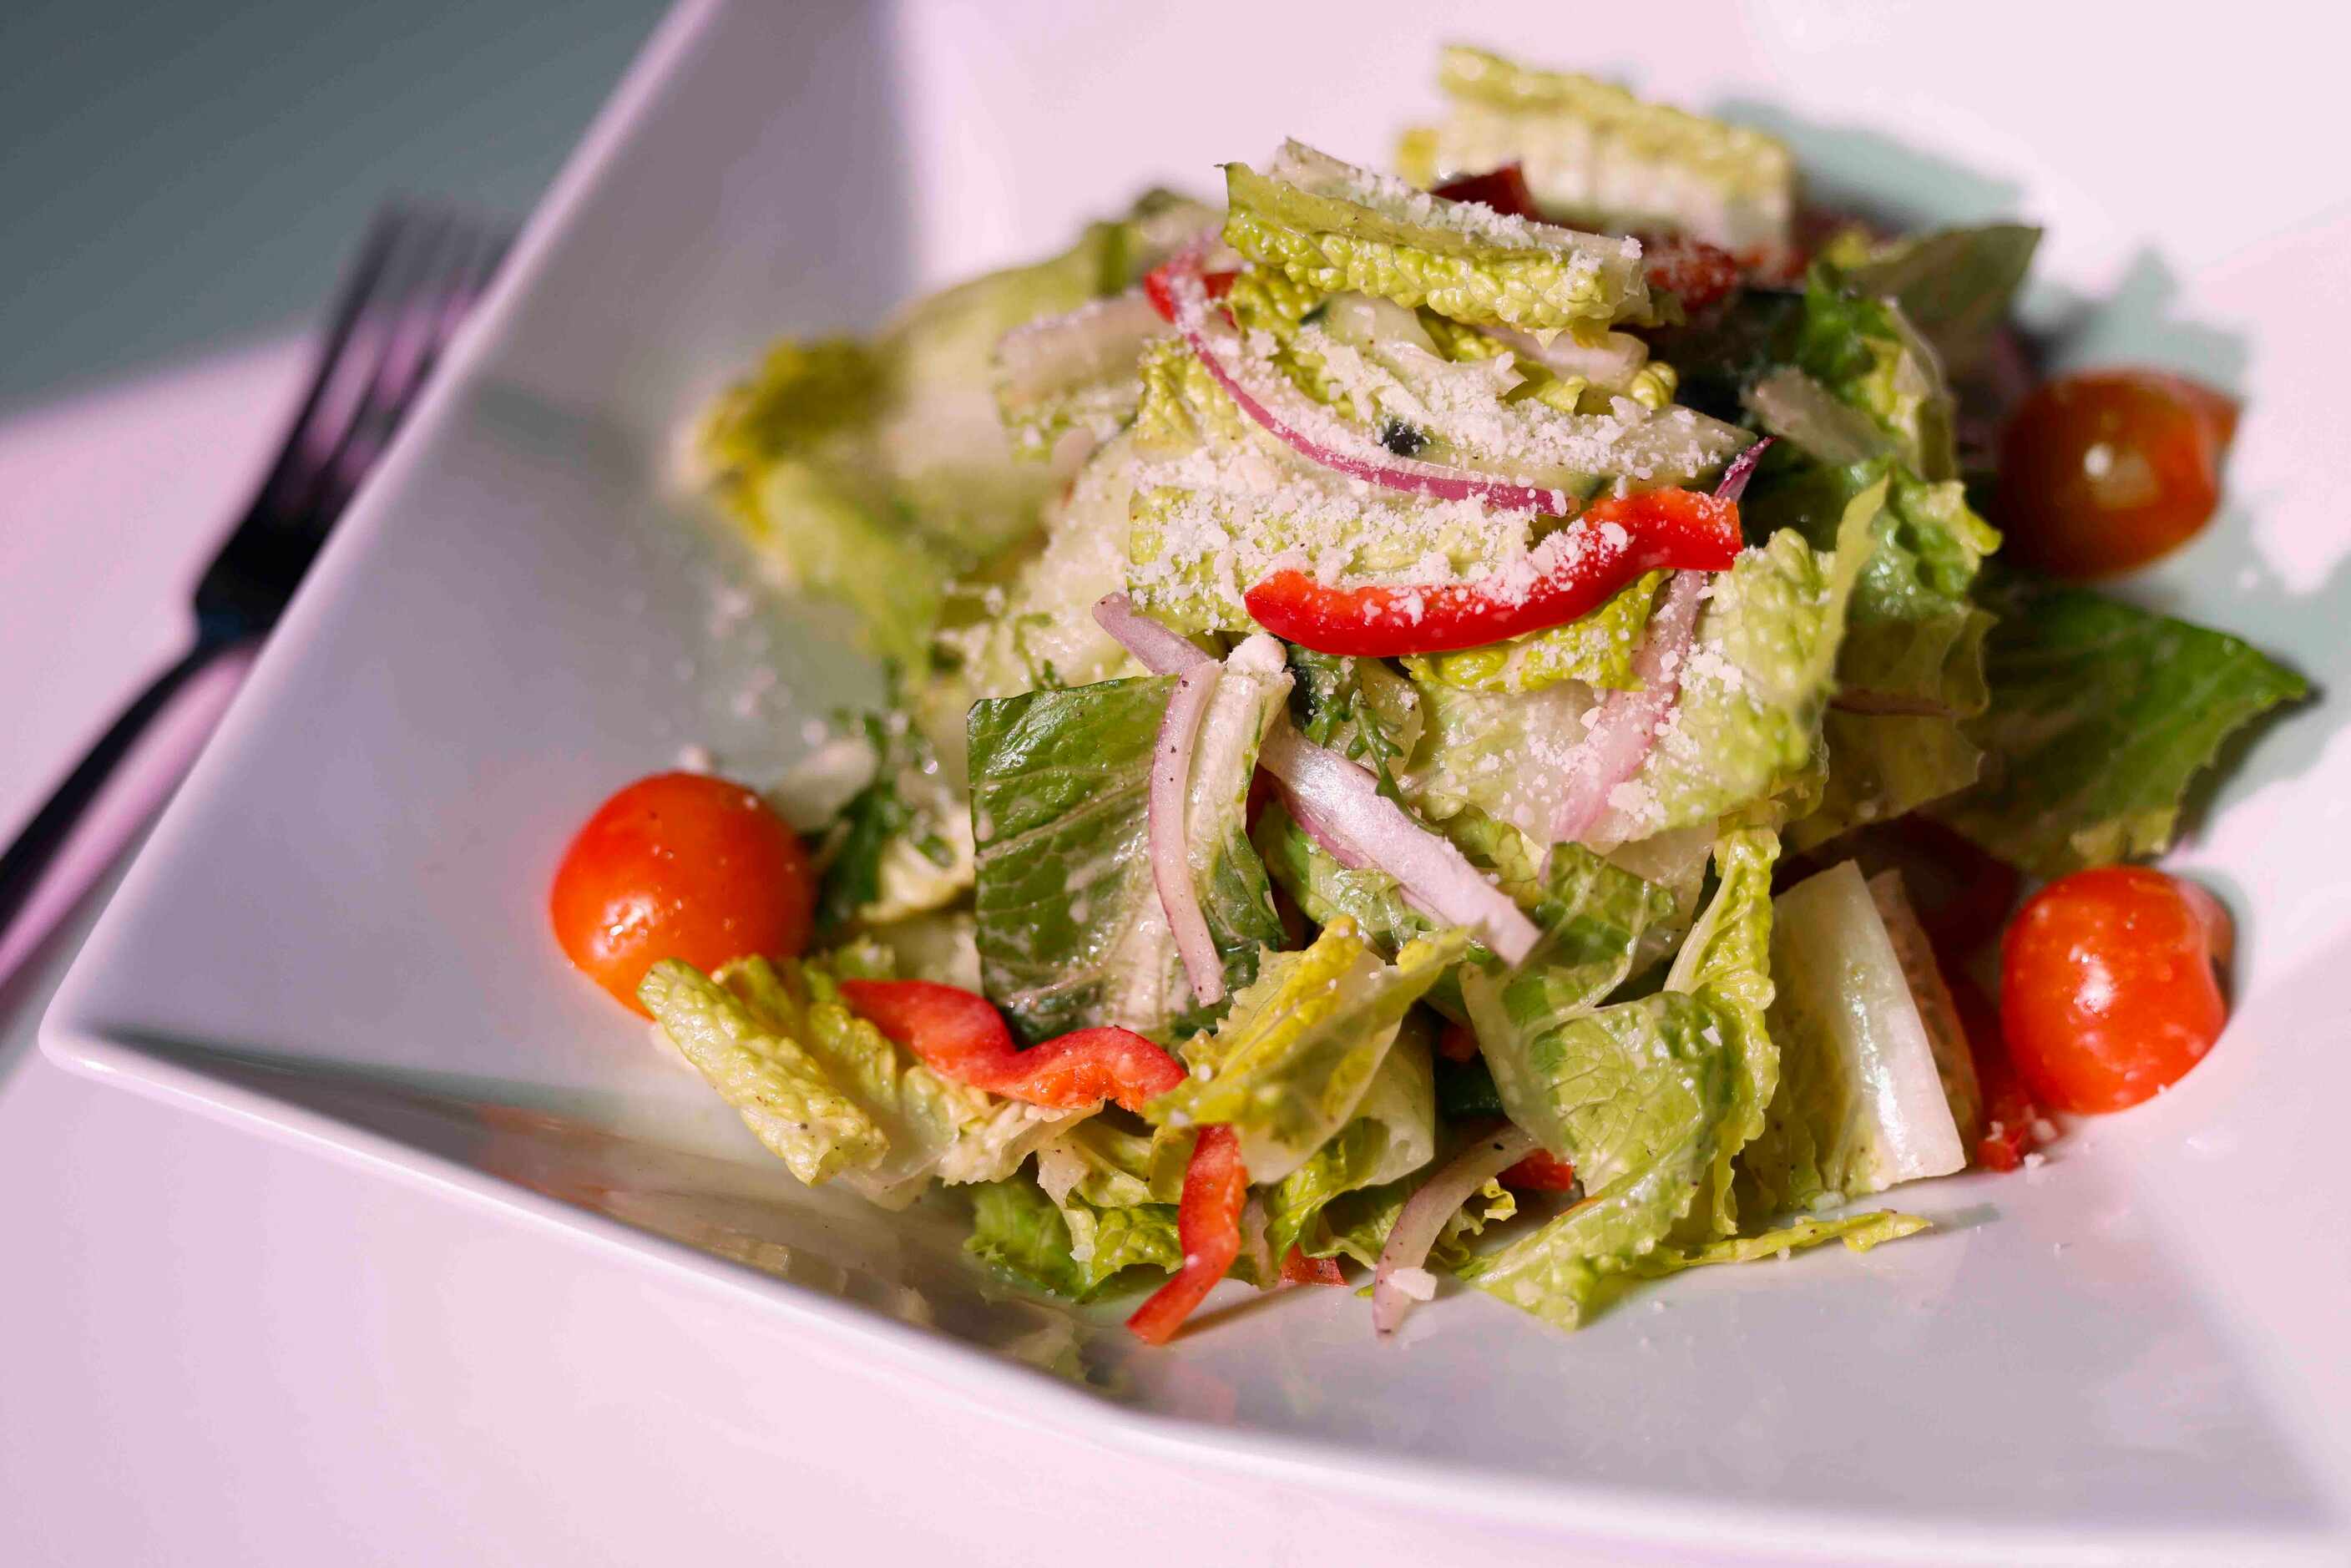 House Greek salad will likely be a popular way to start dinner at Cafe Nubia in Dallas, an...